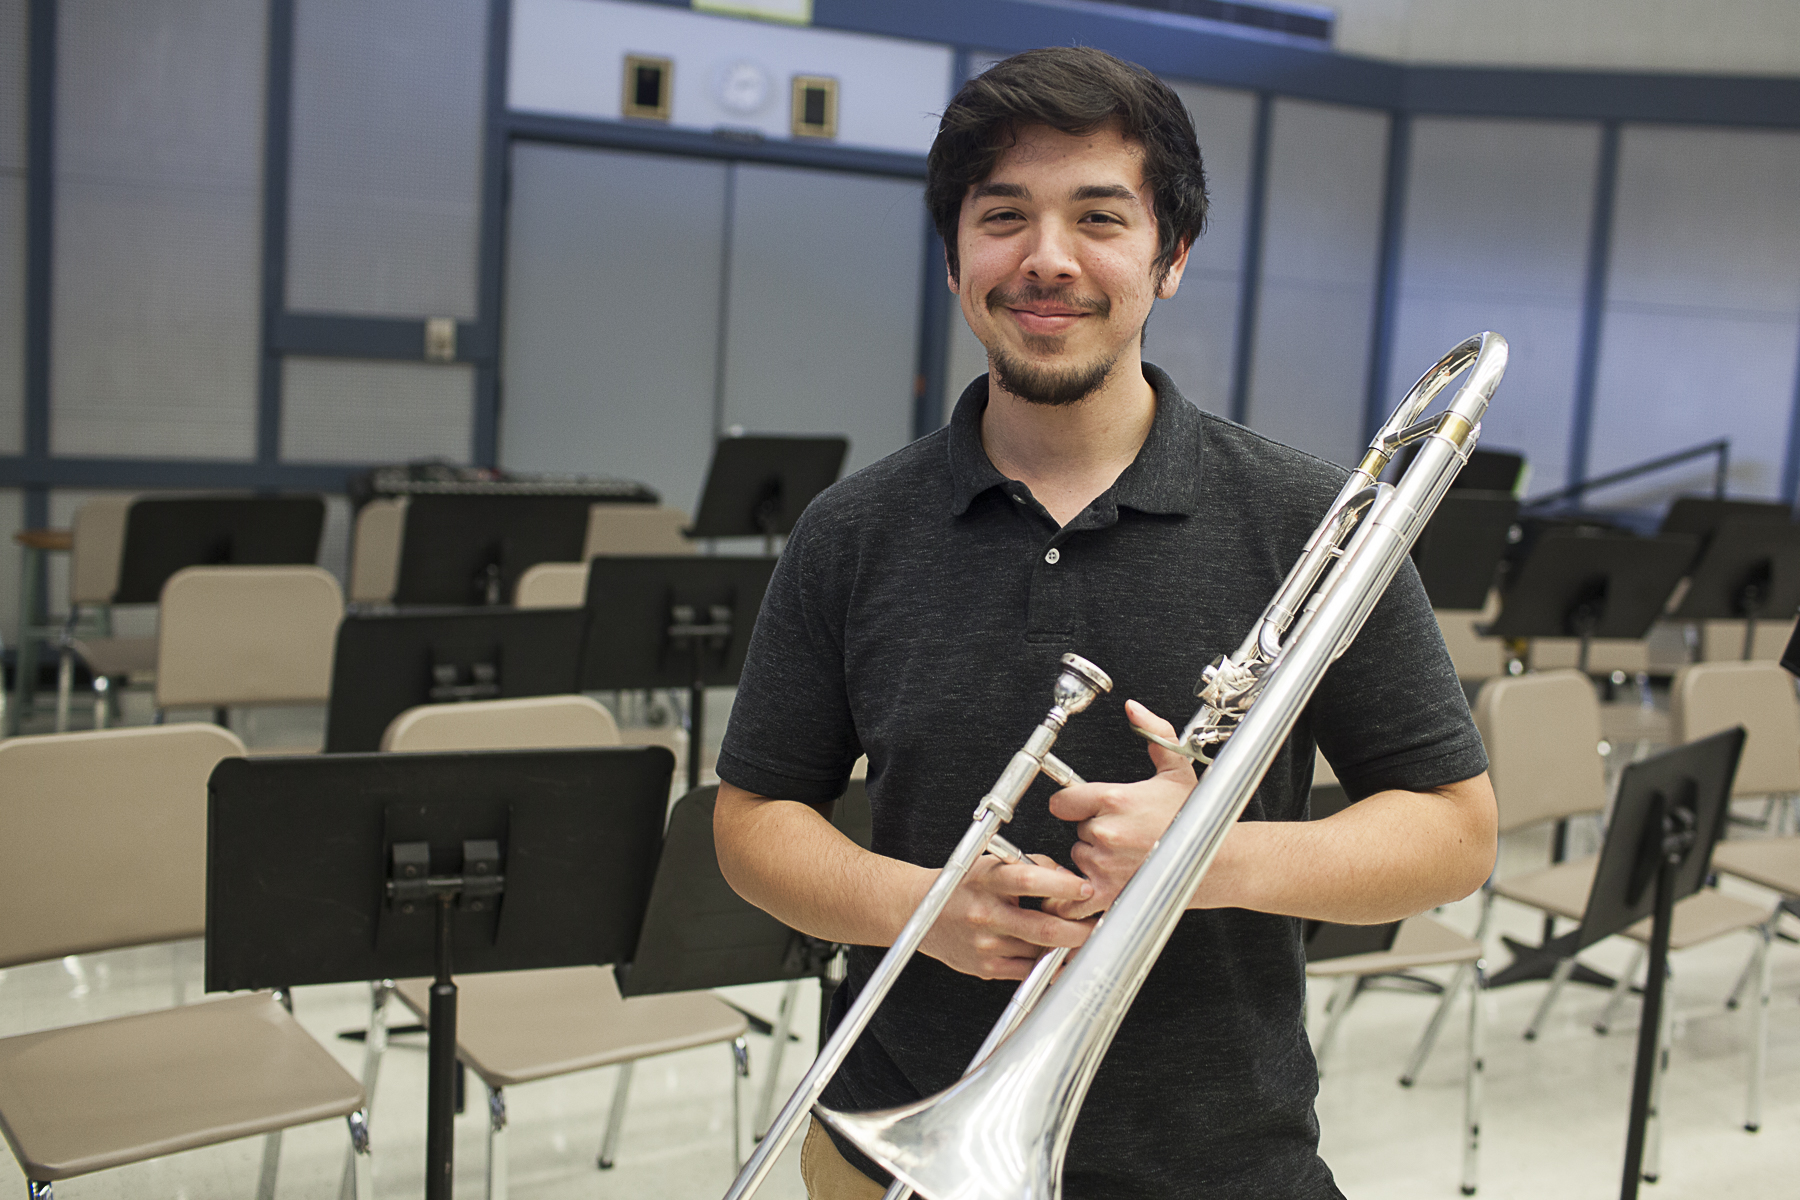 ALL-STATE BAND - WCJC trombone player earns spot on All-State Band